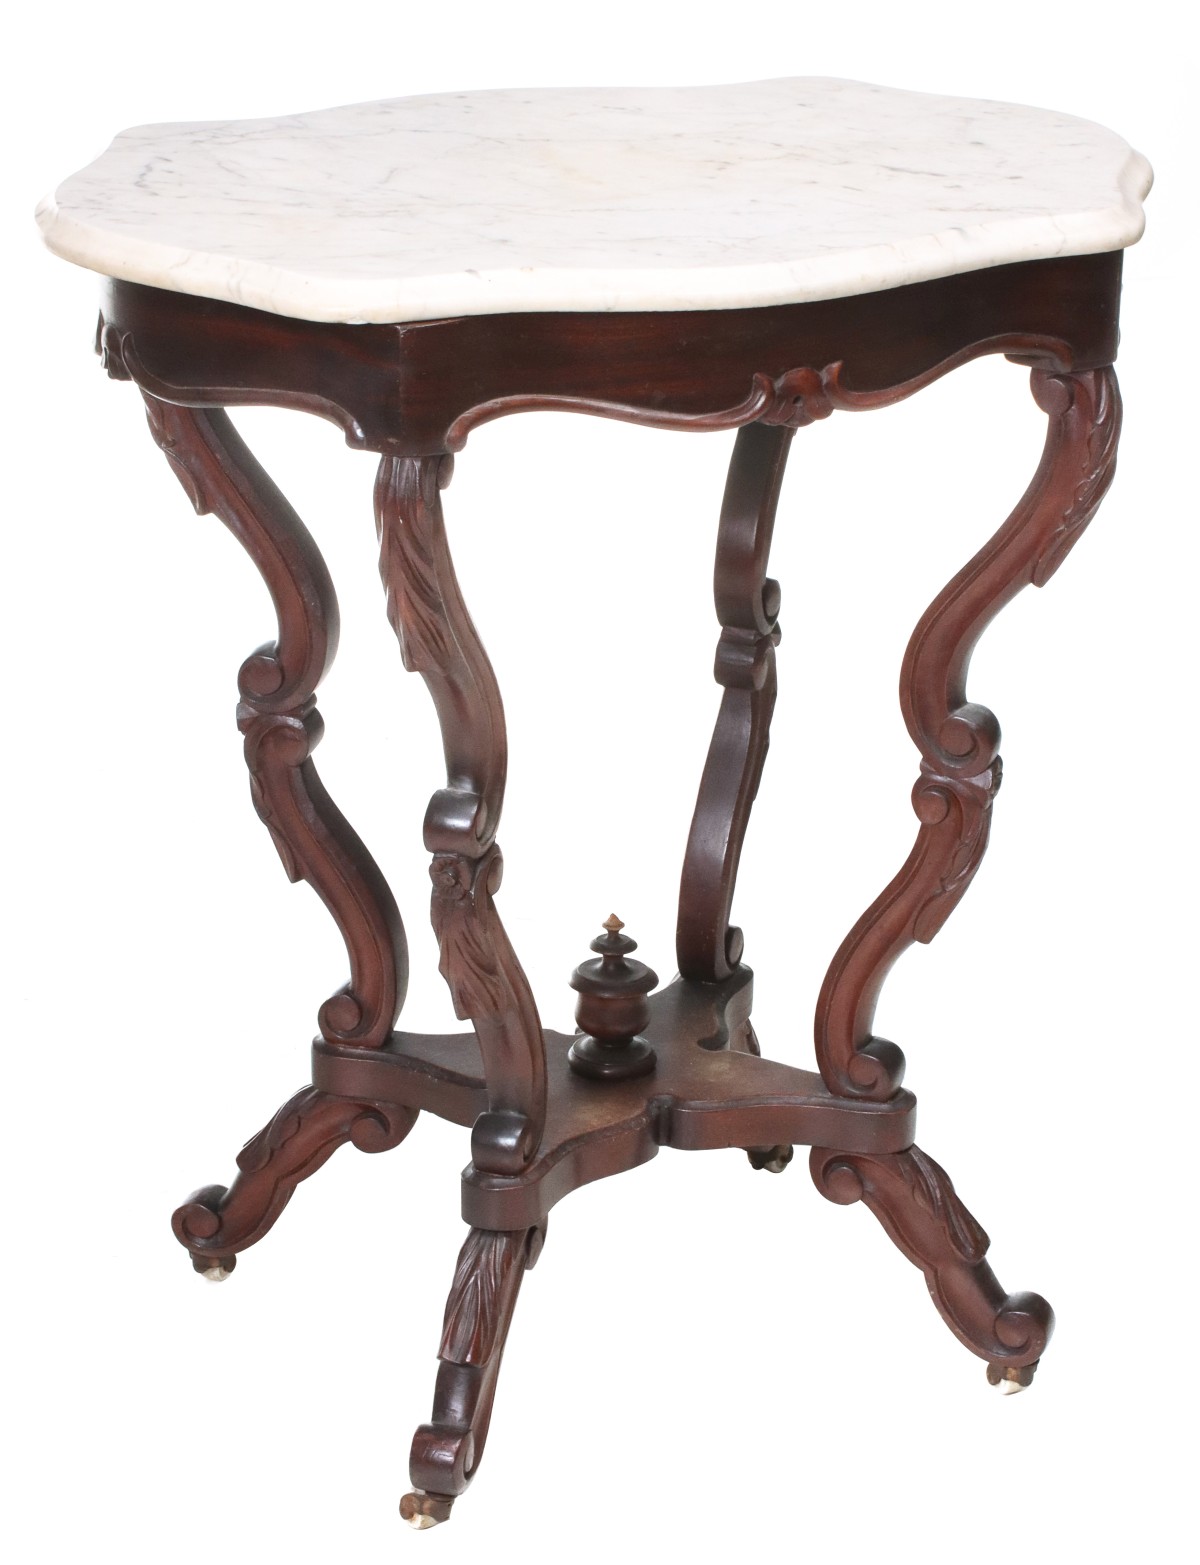 A SMALLER 19TH C. AMERICAN TURTLETOP FORM LAMP TABLE